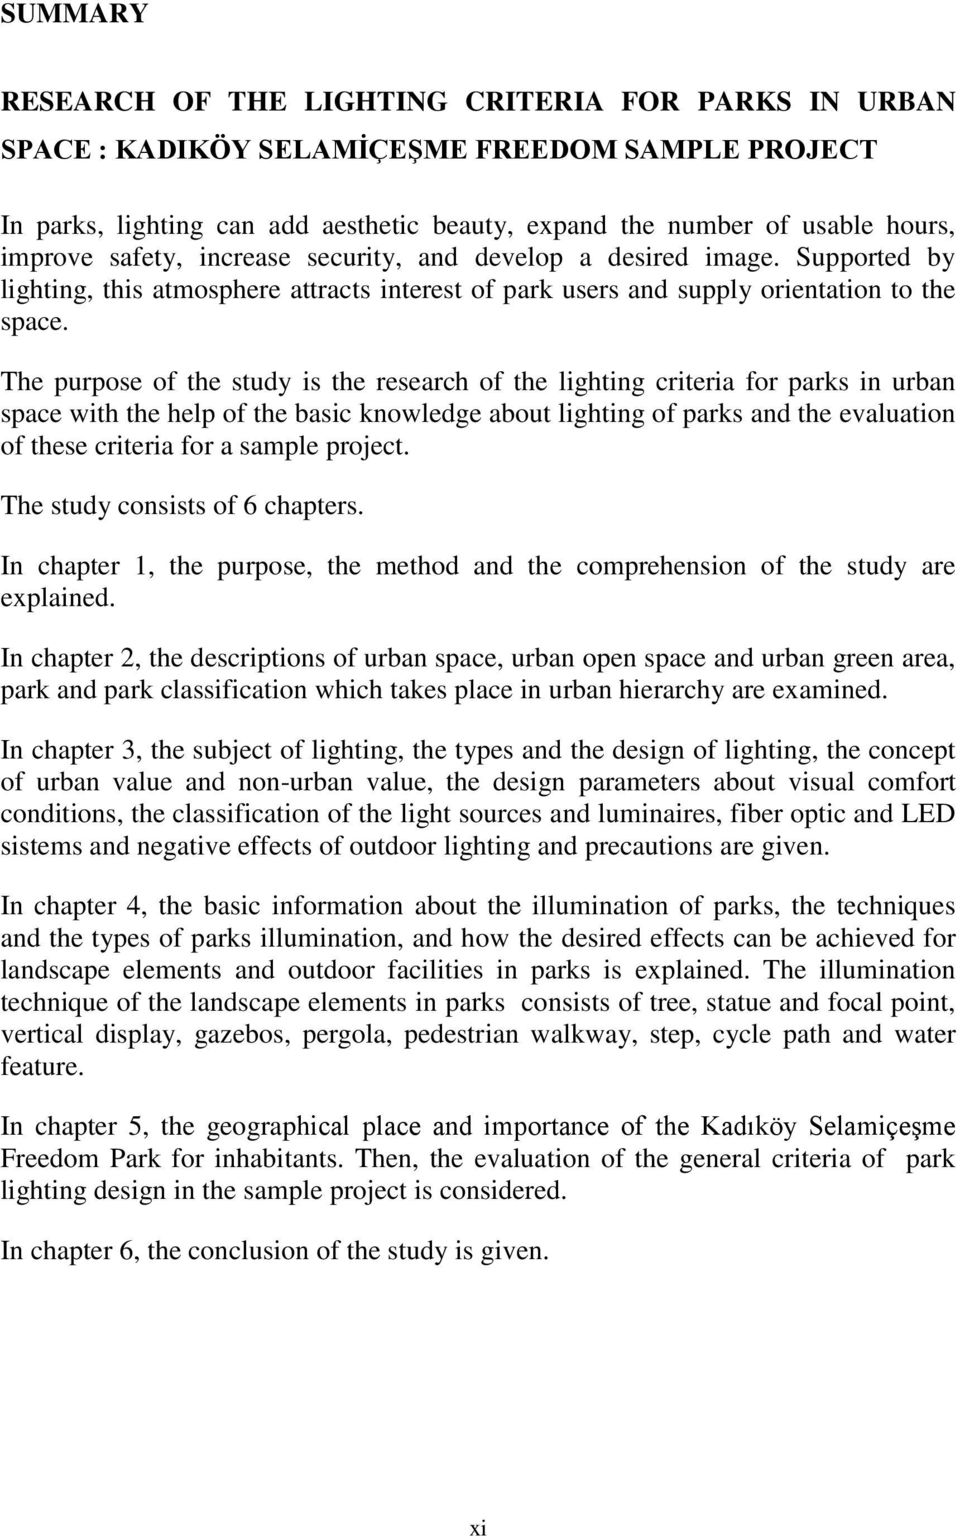 The purpose of the study is the research of the lighting criteria for parks in urban space with the help of the basic knowledge about lighting of parks and the evaluation of these criteria for a